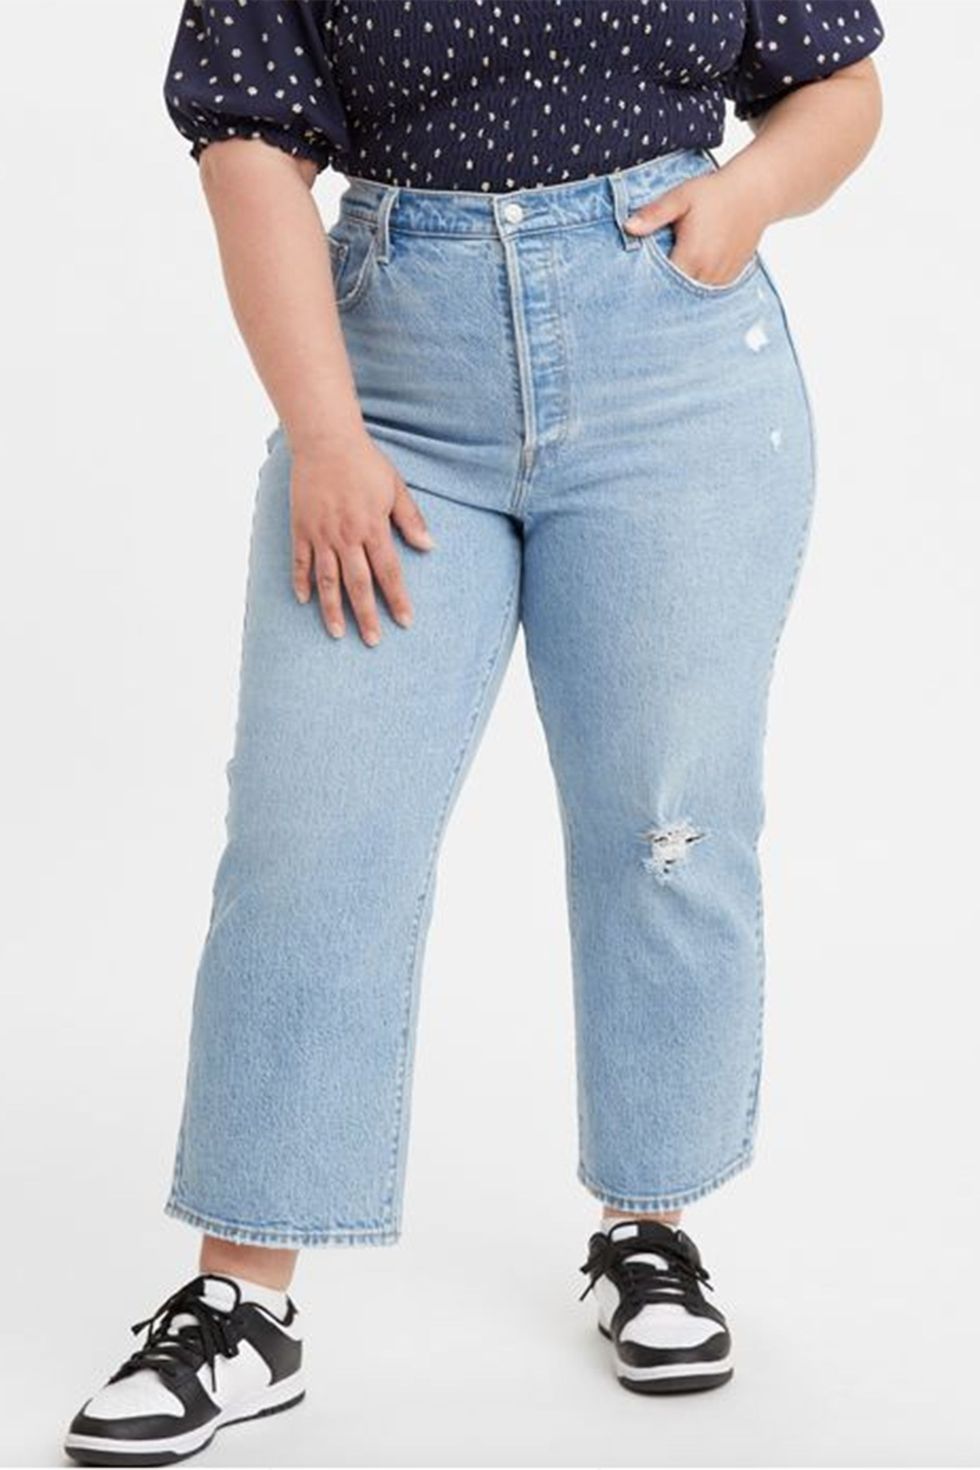 Fupa jeans #momjeans #over40 #fupa #highwaisted #jeans #bestjeans